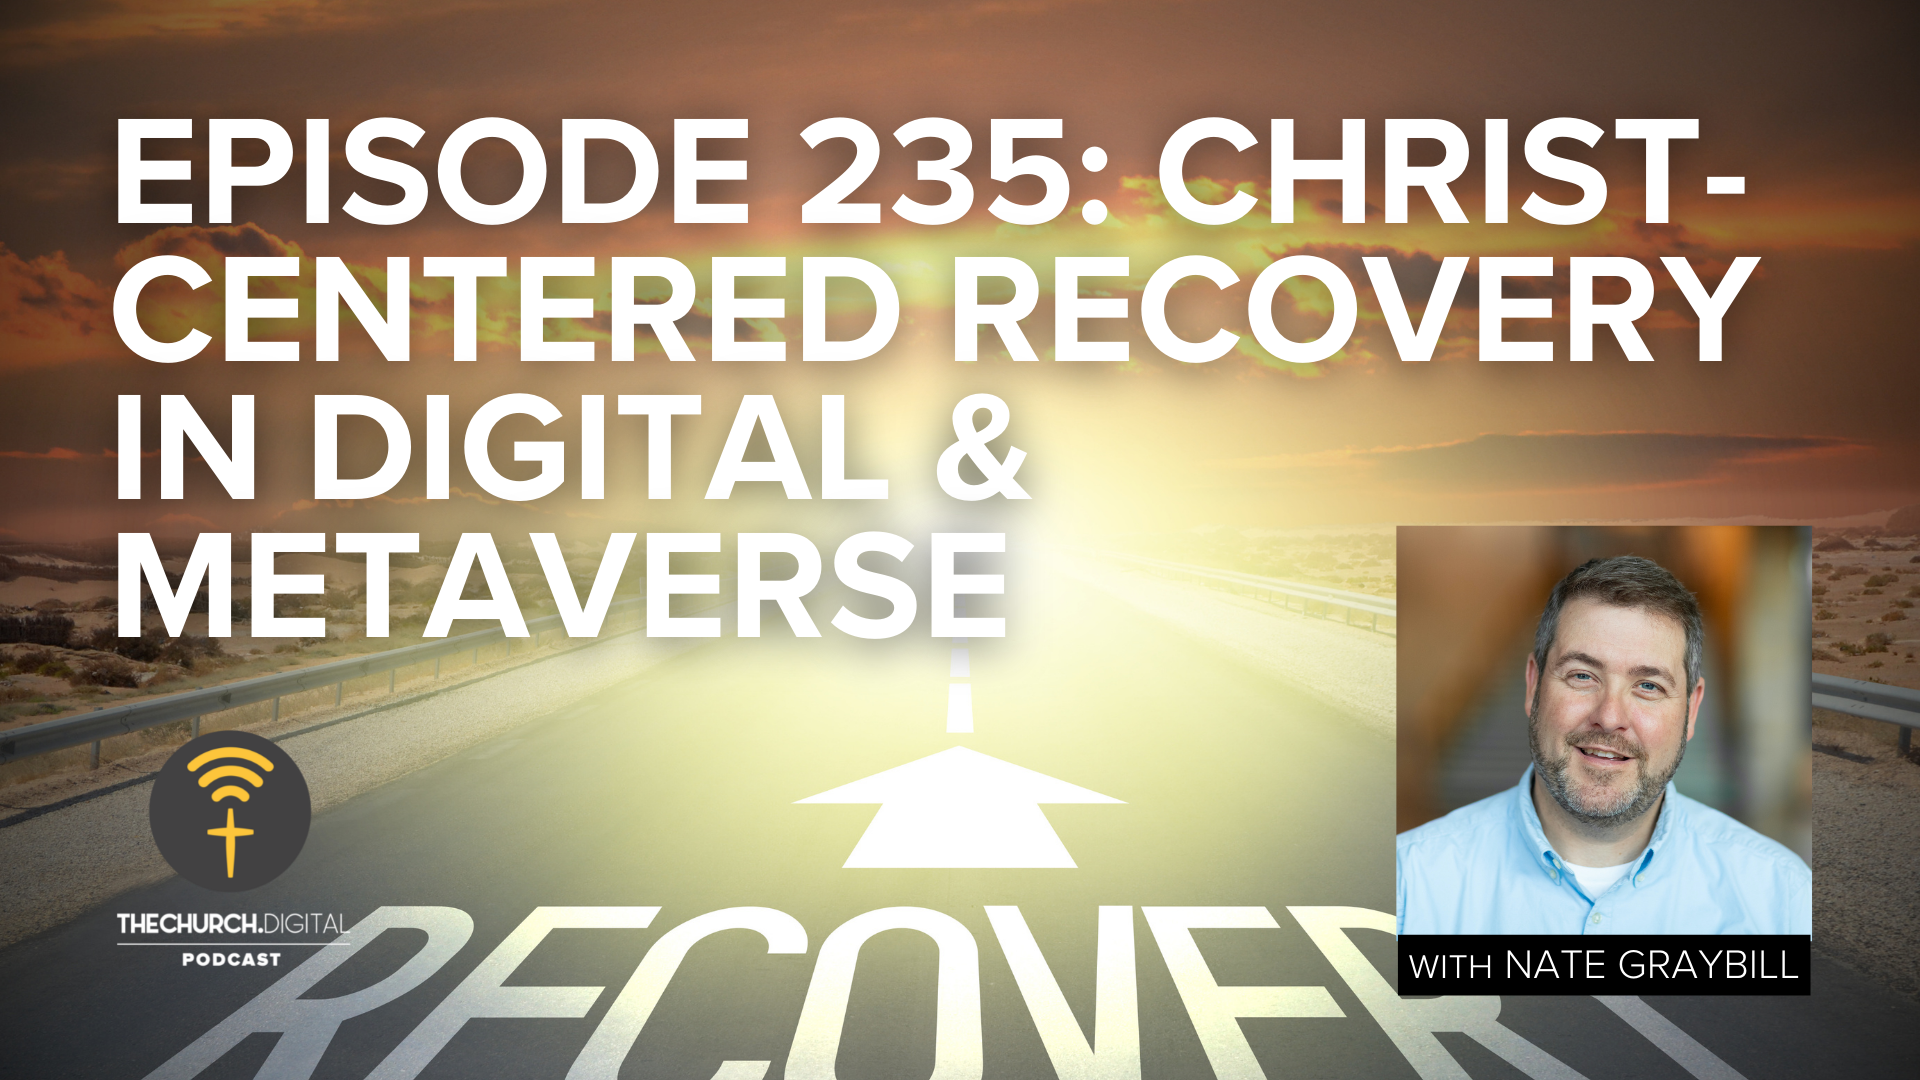 EP235: Christ-Centered Recovery with Nate Graybill